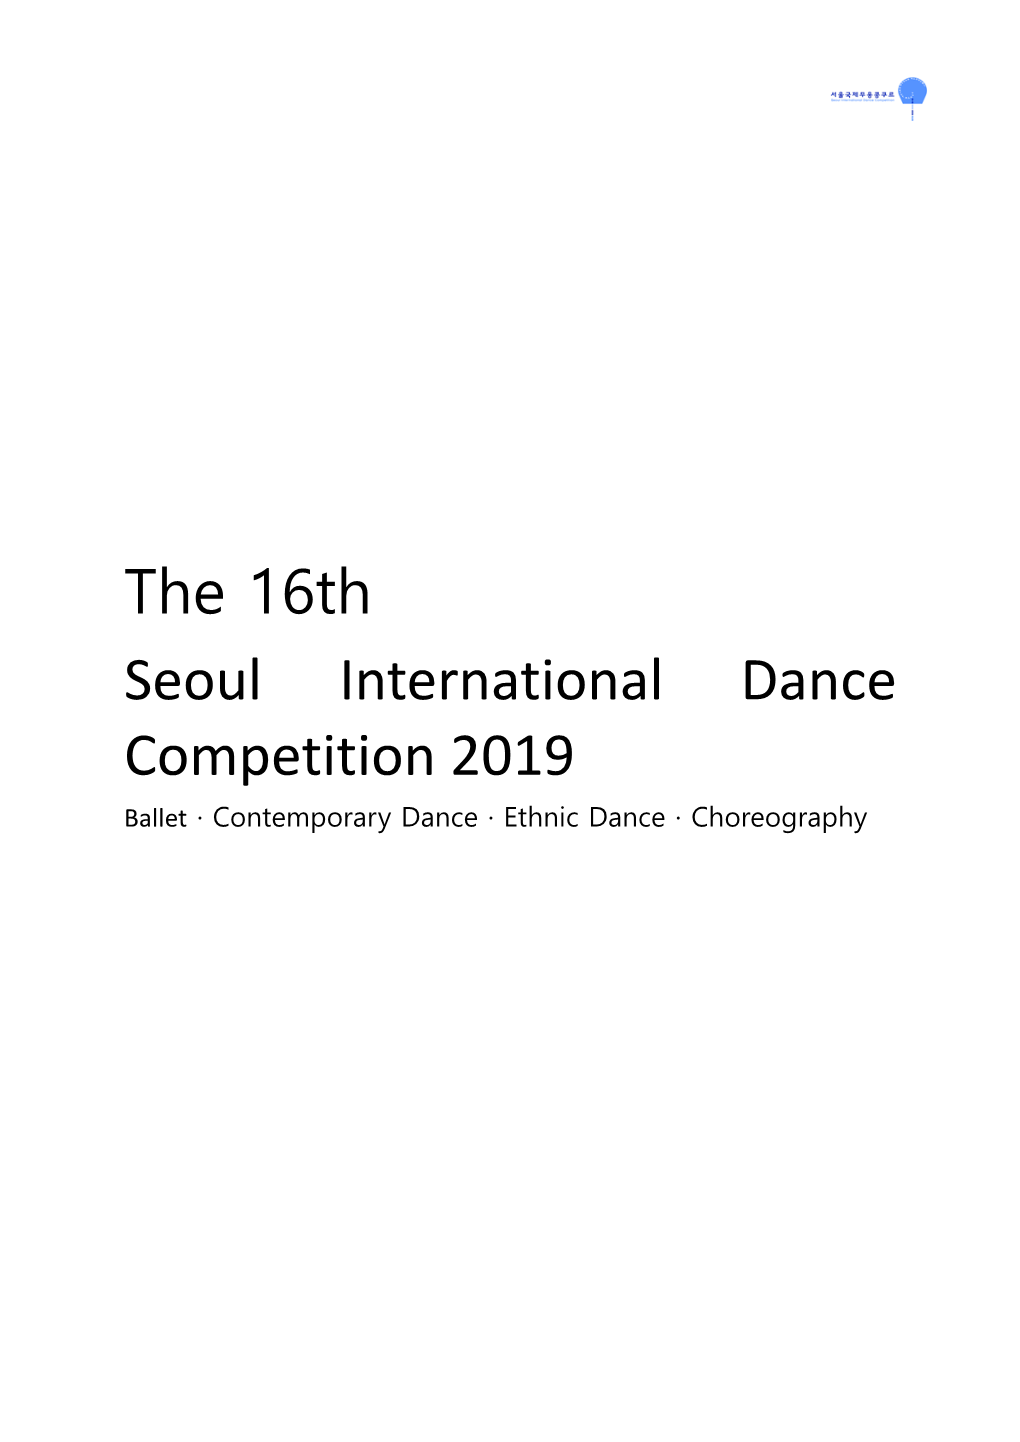 The 16Th Seoul International Dance Competition 2019